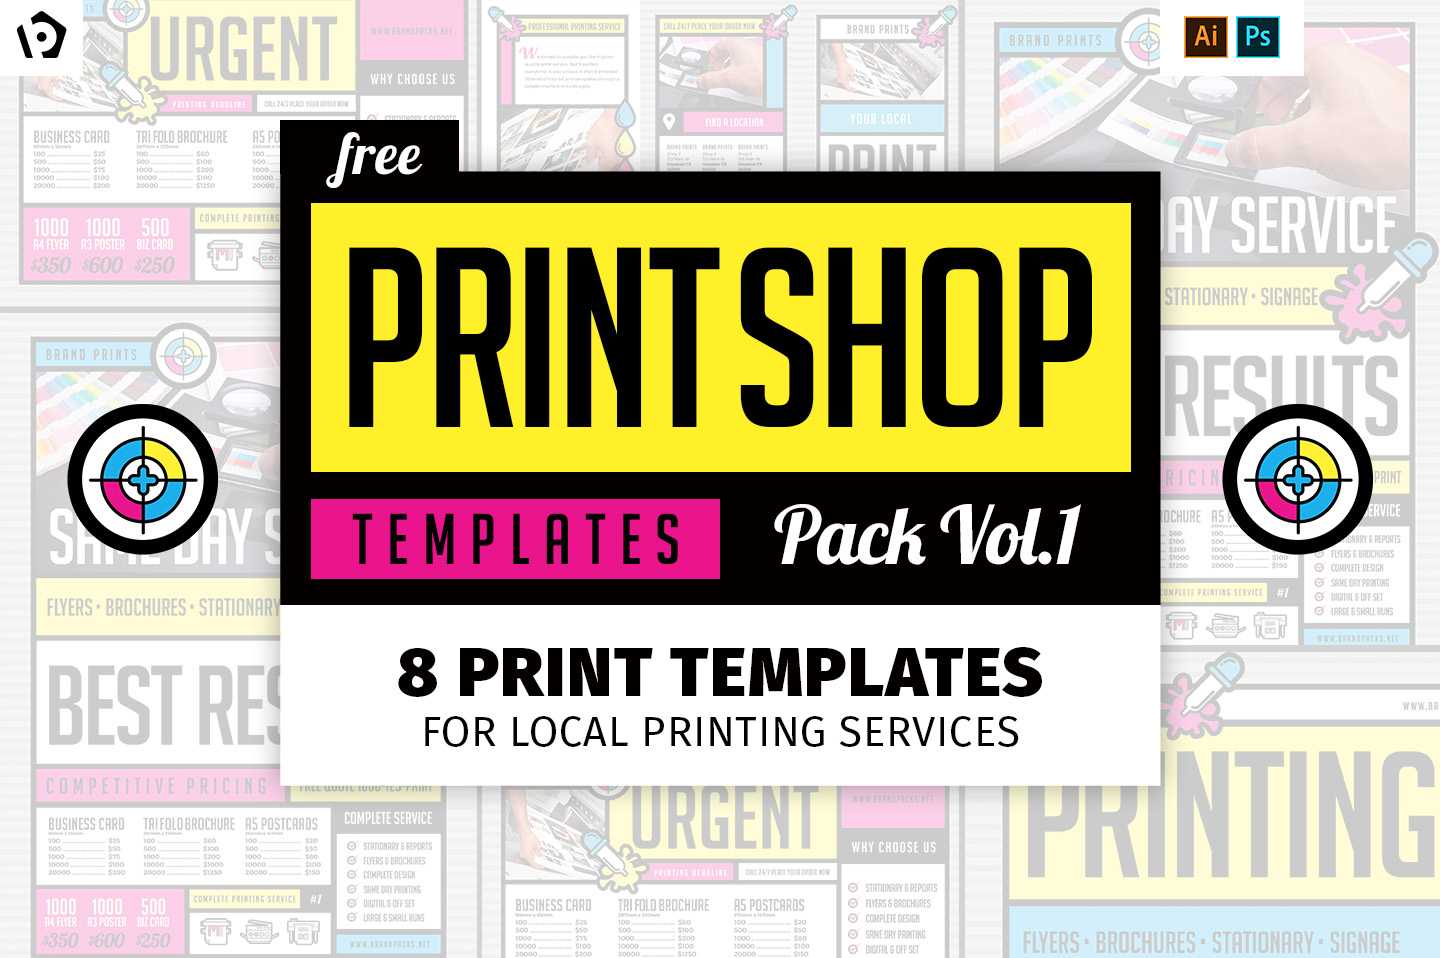 Free Print Shop Templates For Local Printing Services For Free Templates For Cards Print